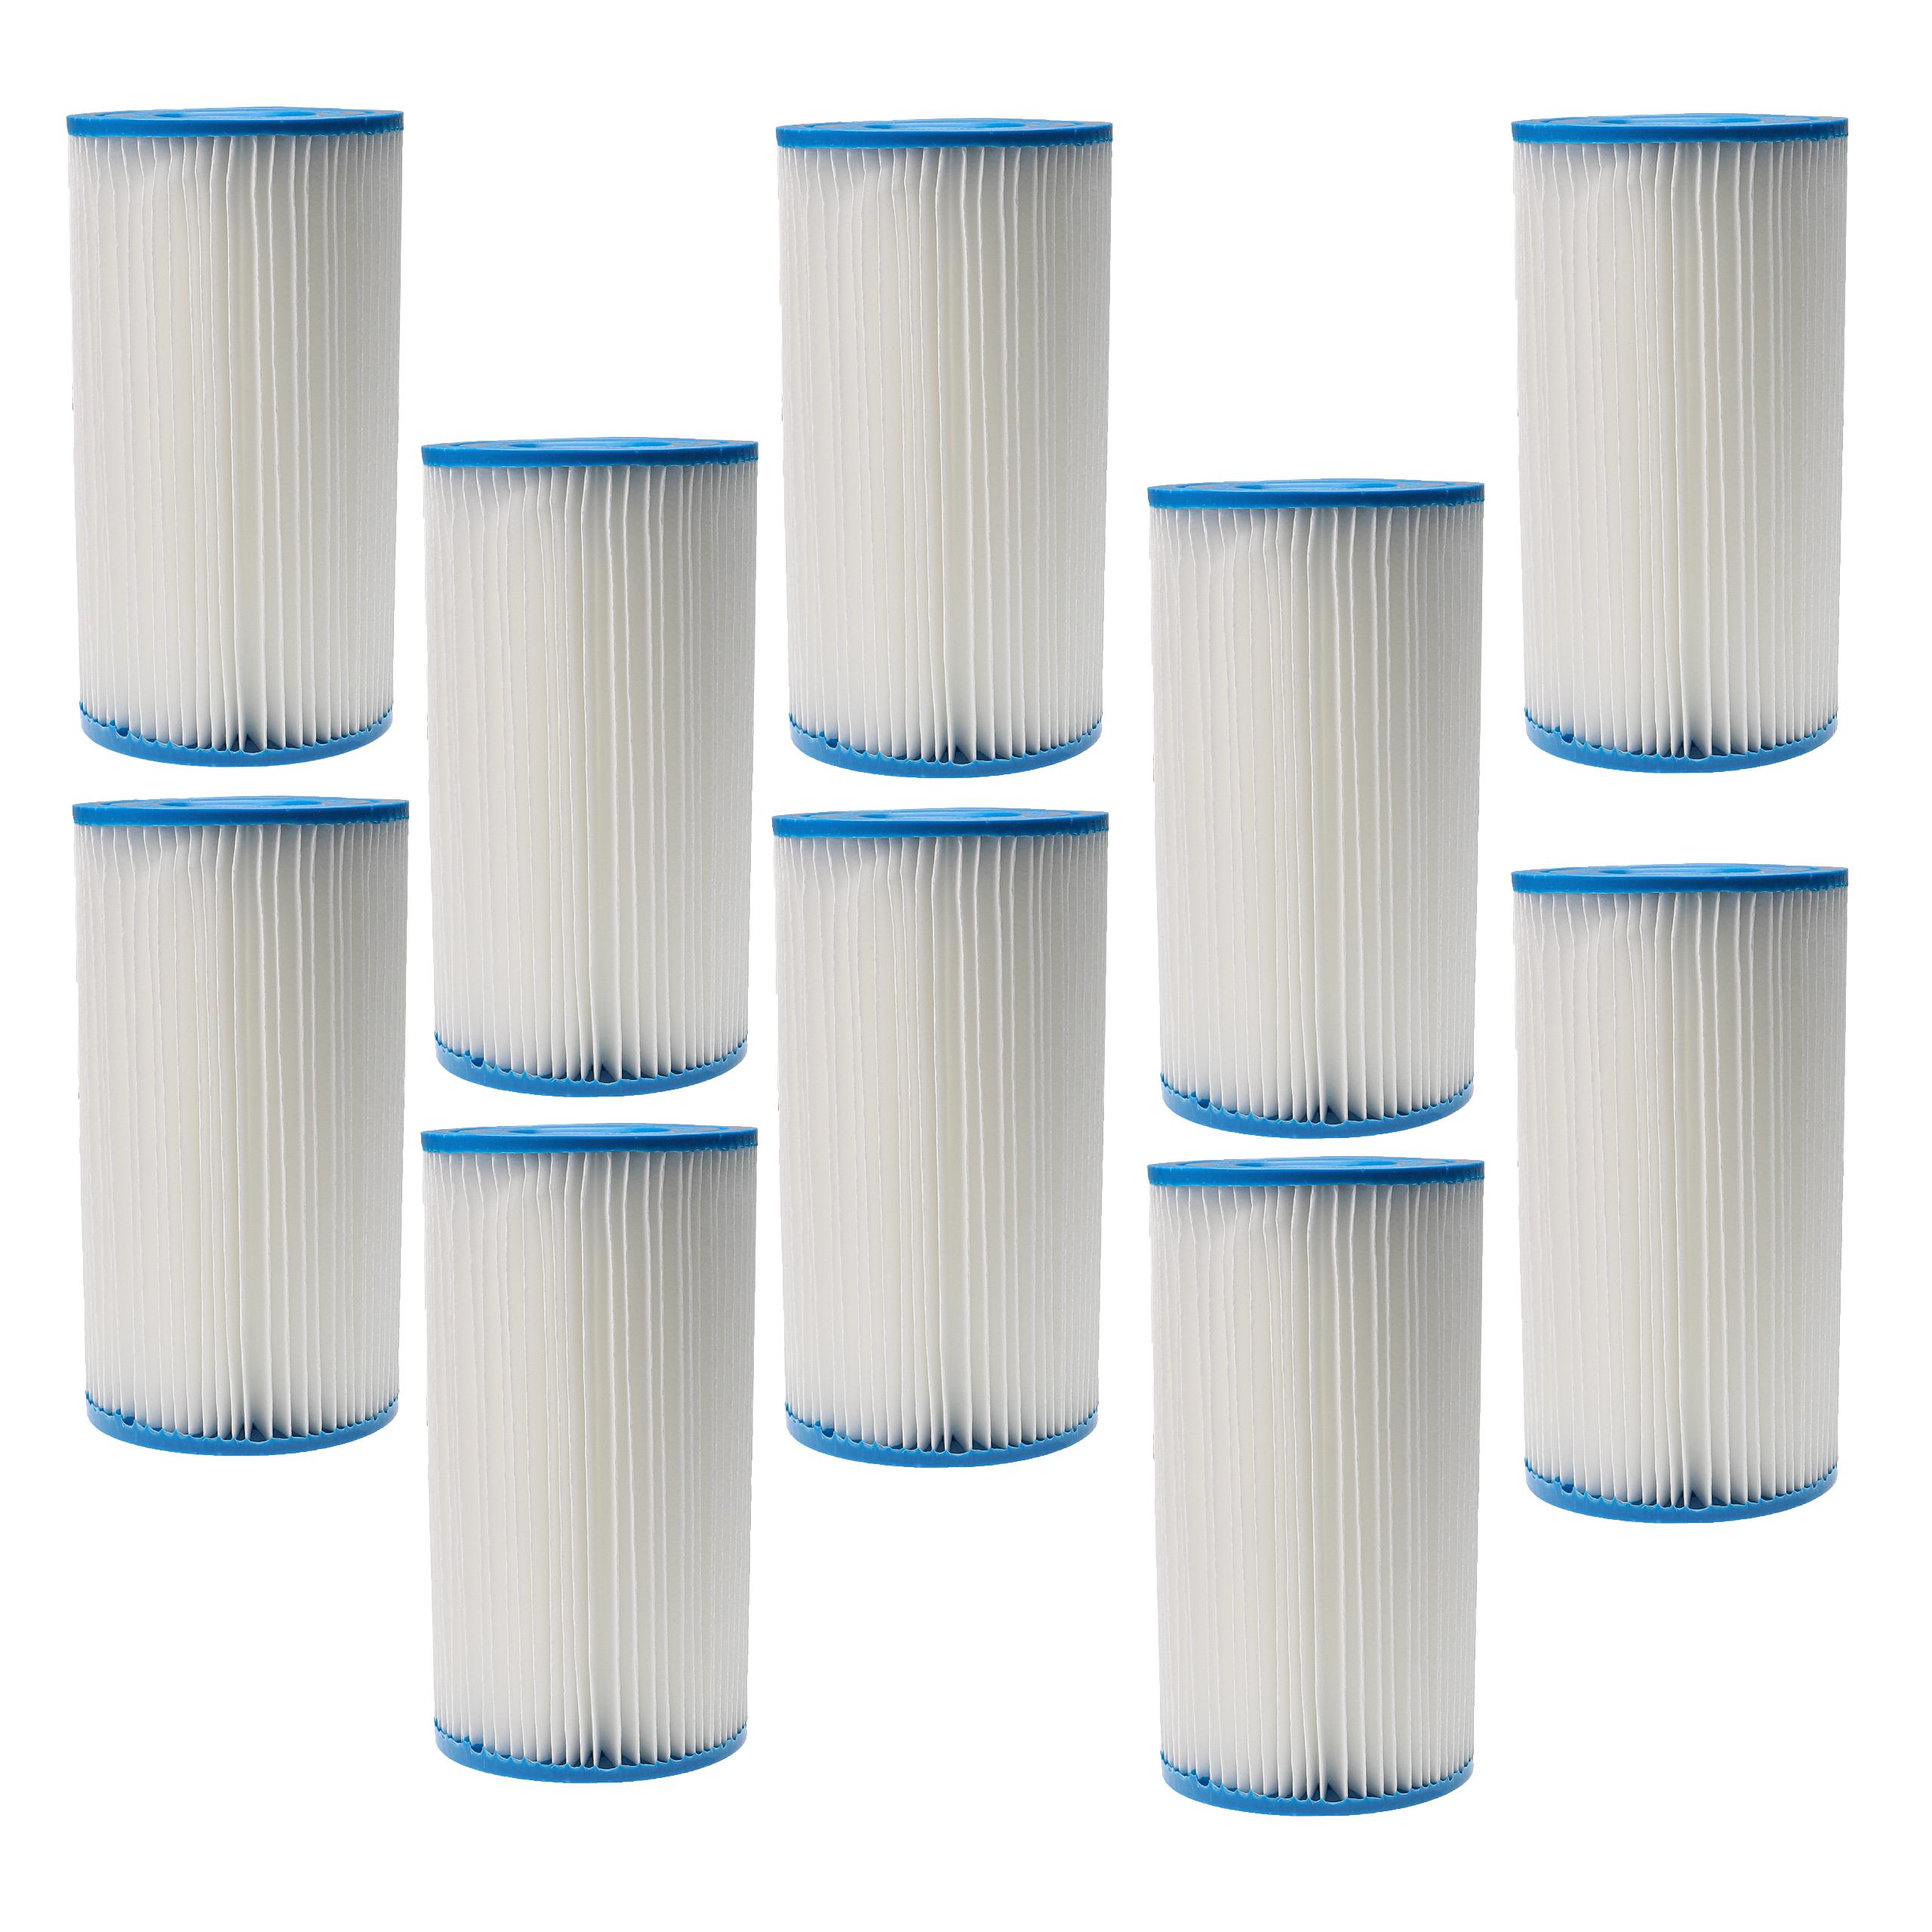 10x Water Filter replaces Intex filter type A for Intex Swimming Pool & Pump - Filter Cartridge